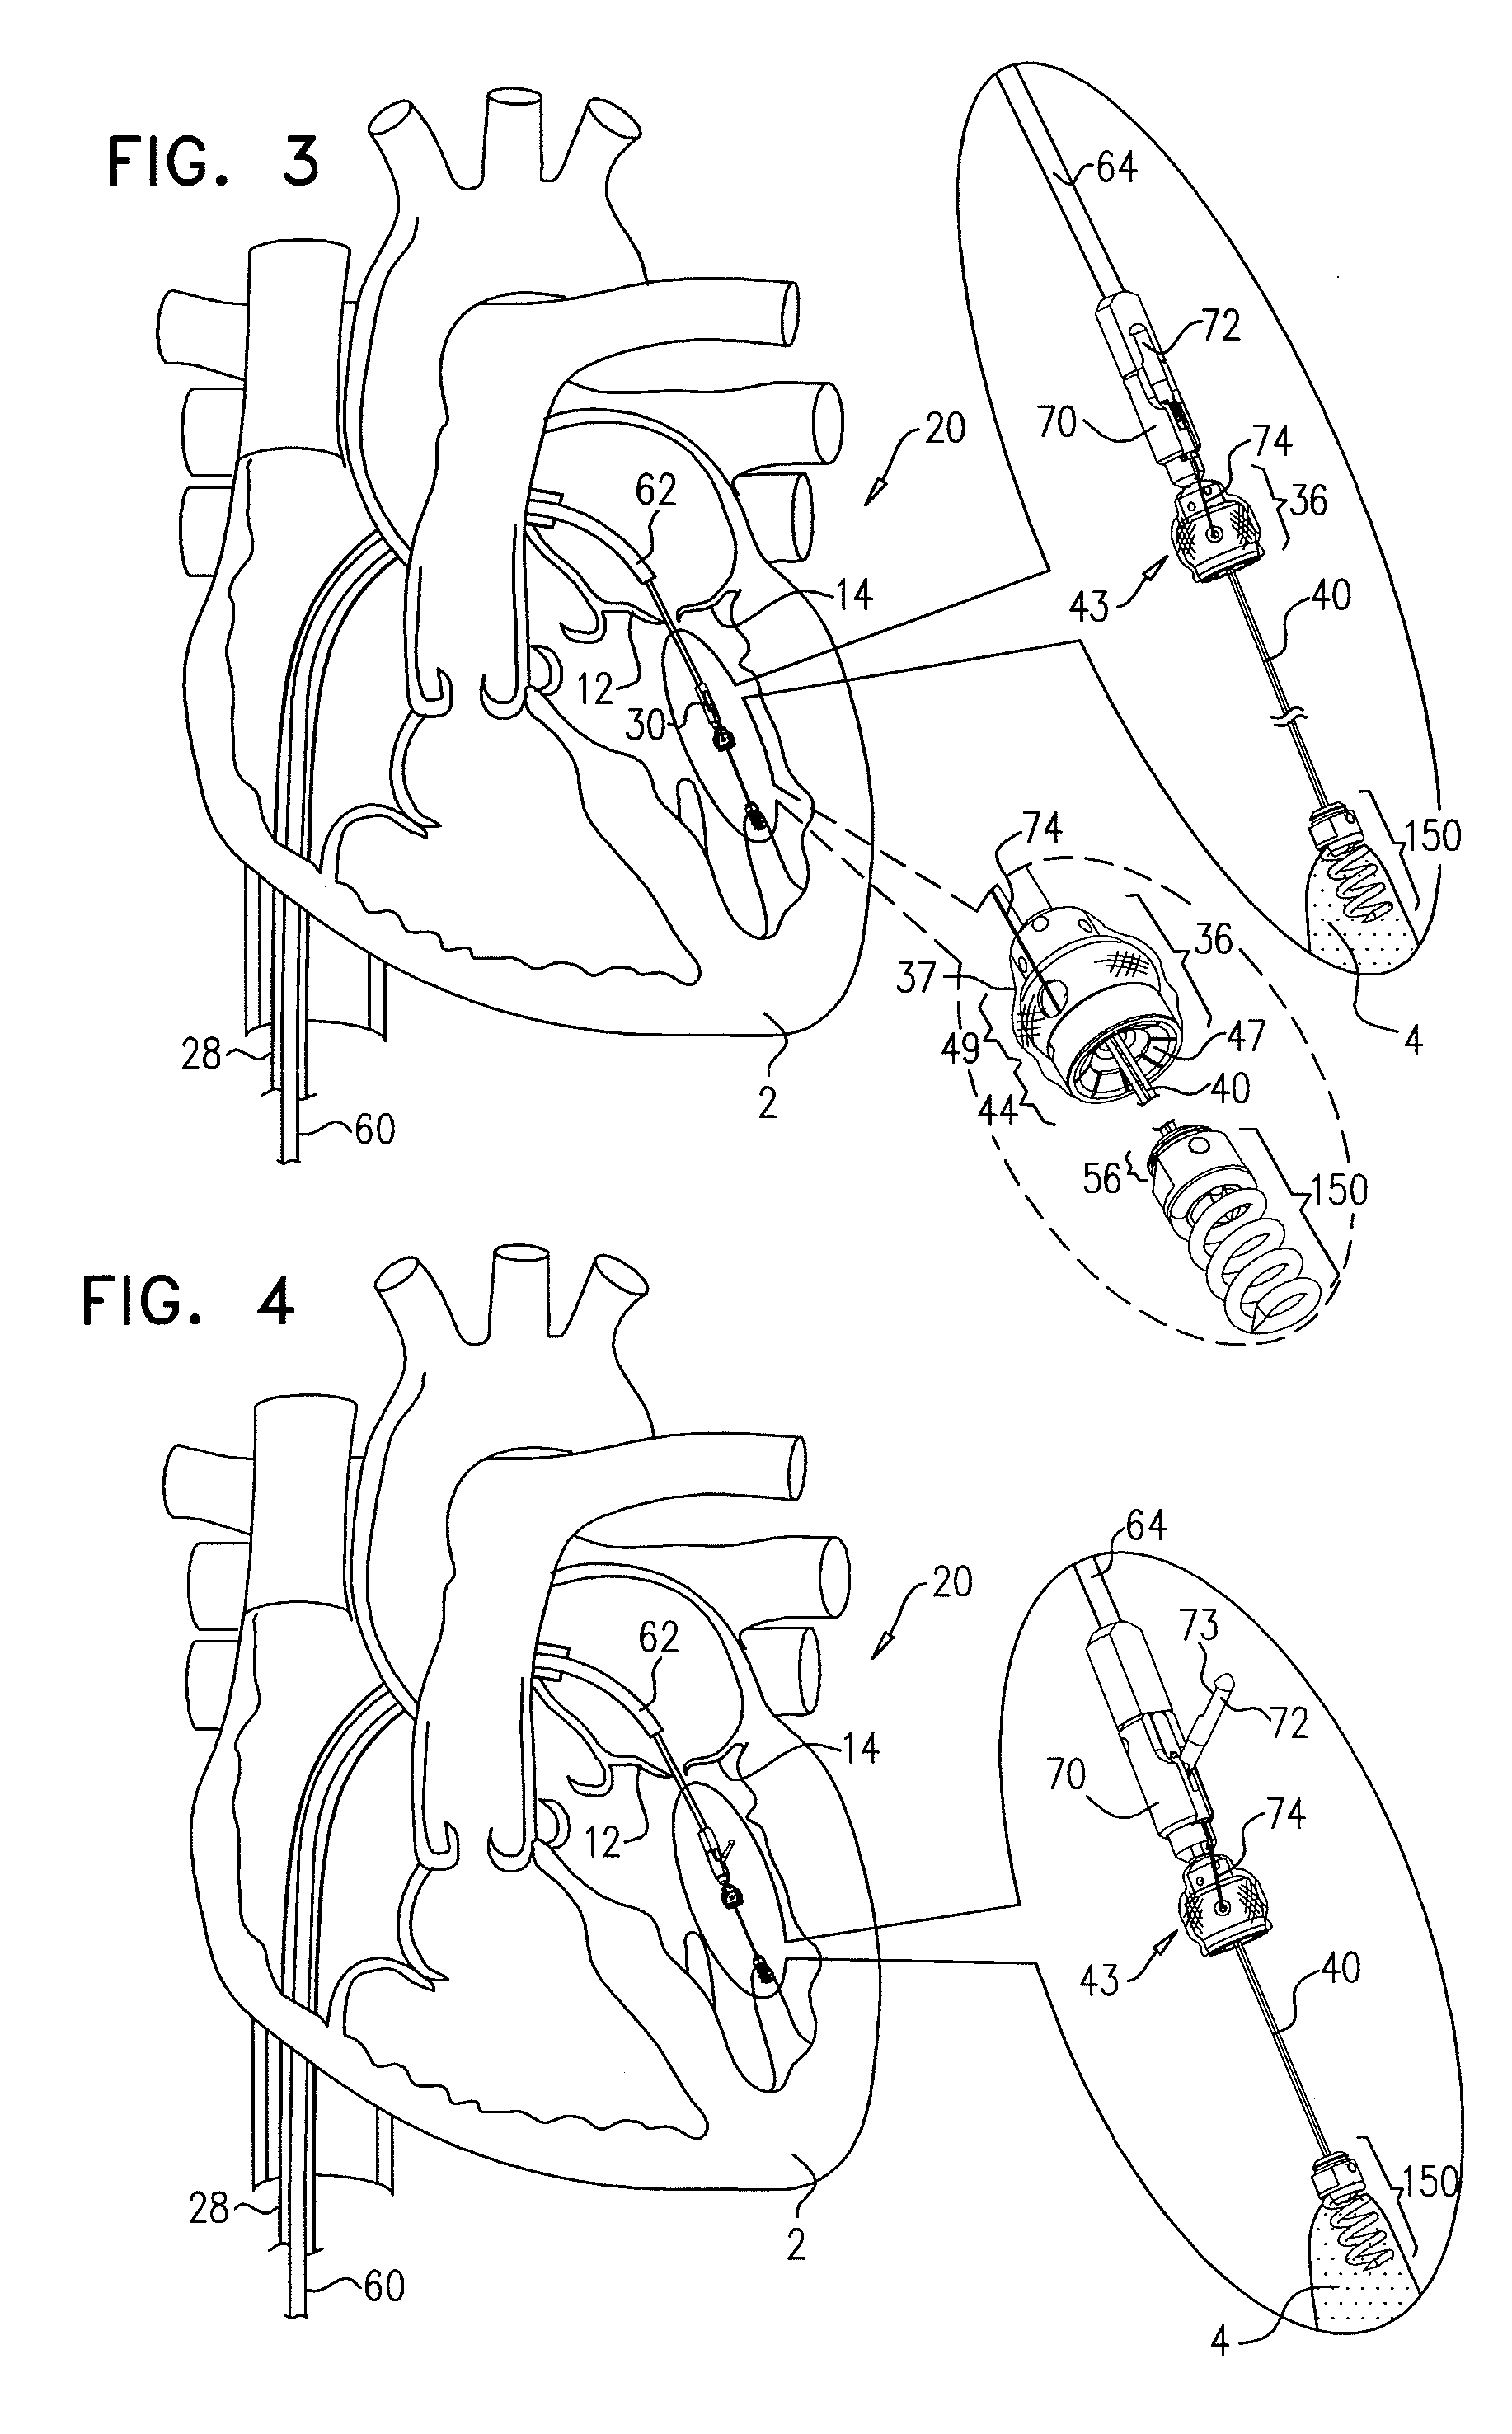 Method for guide-wire based advancement of a rotation assembly